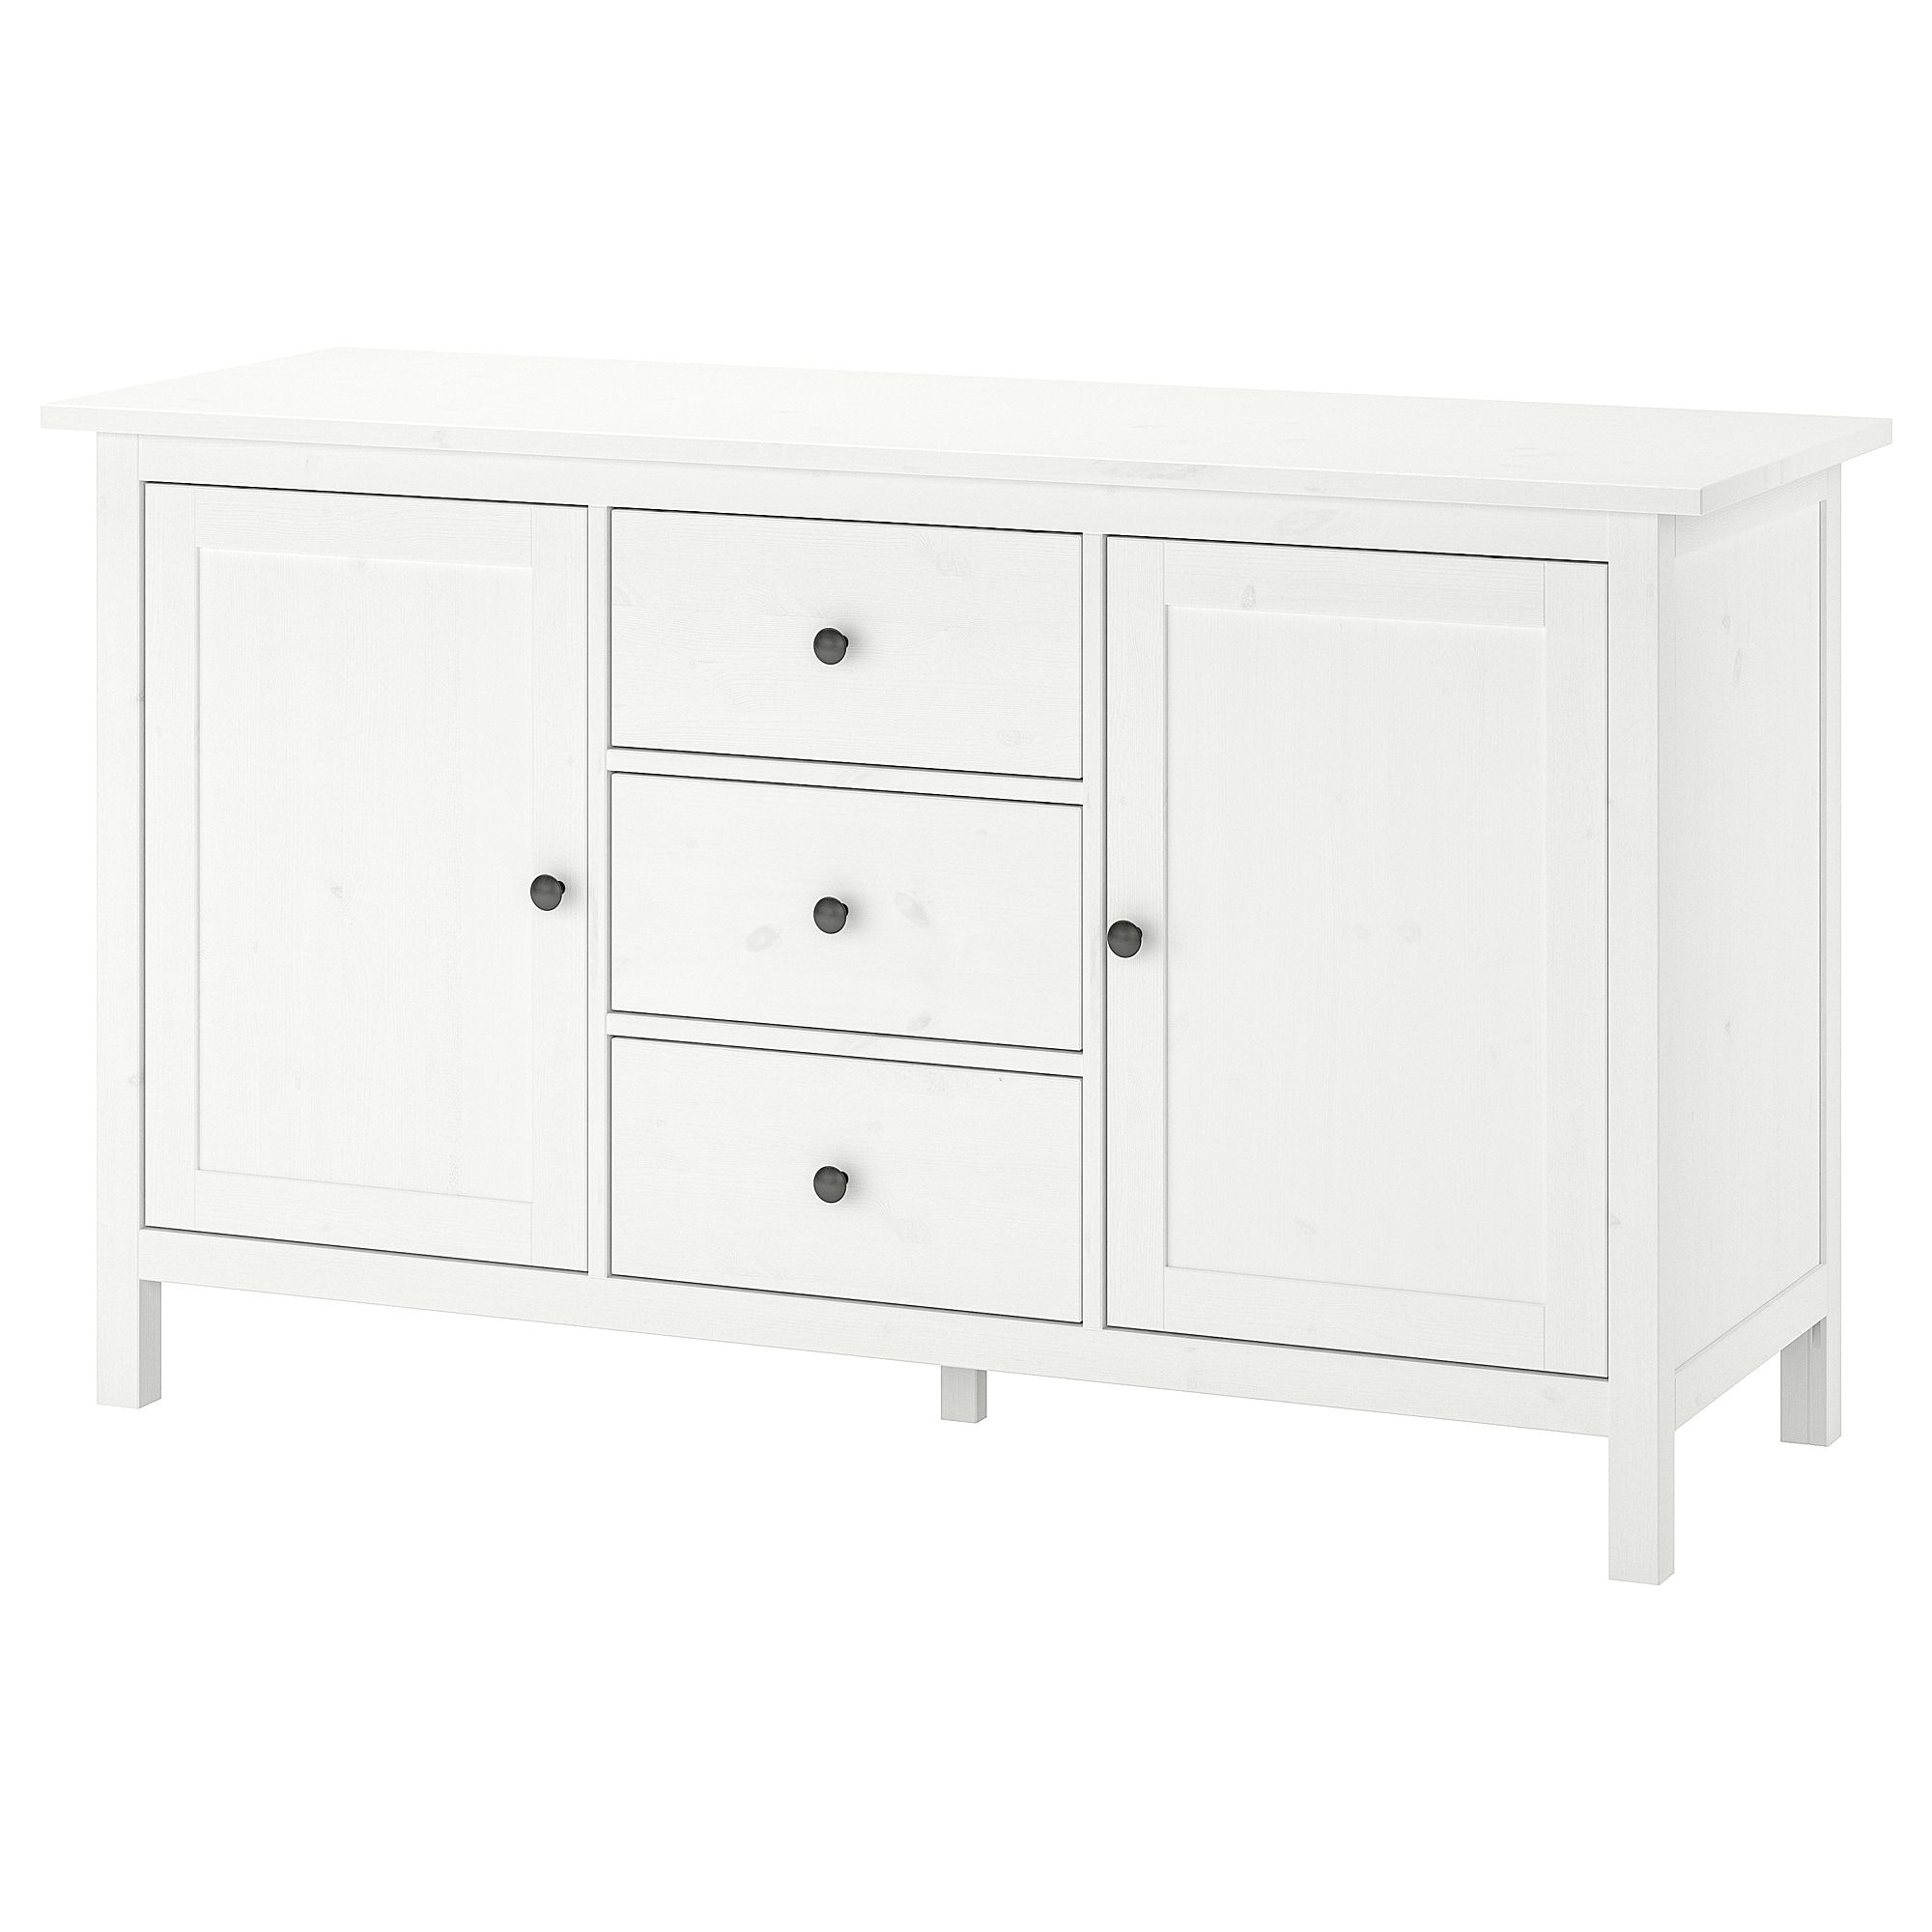 Hemnes Sideboard, White Stain For North York Sideboards (View 16 of 30)